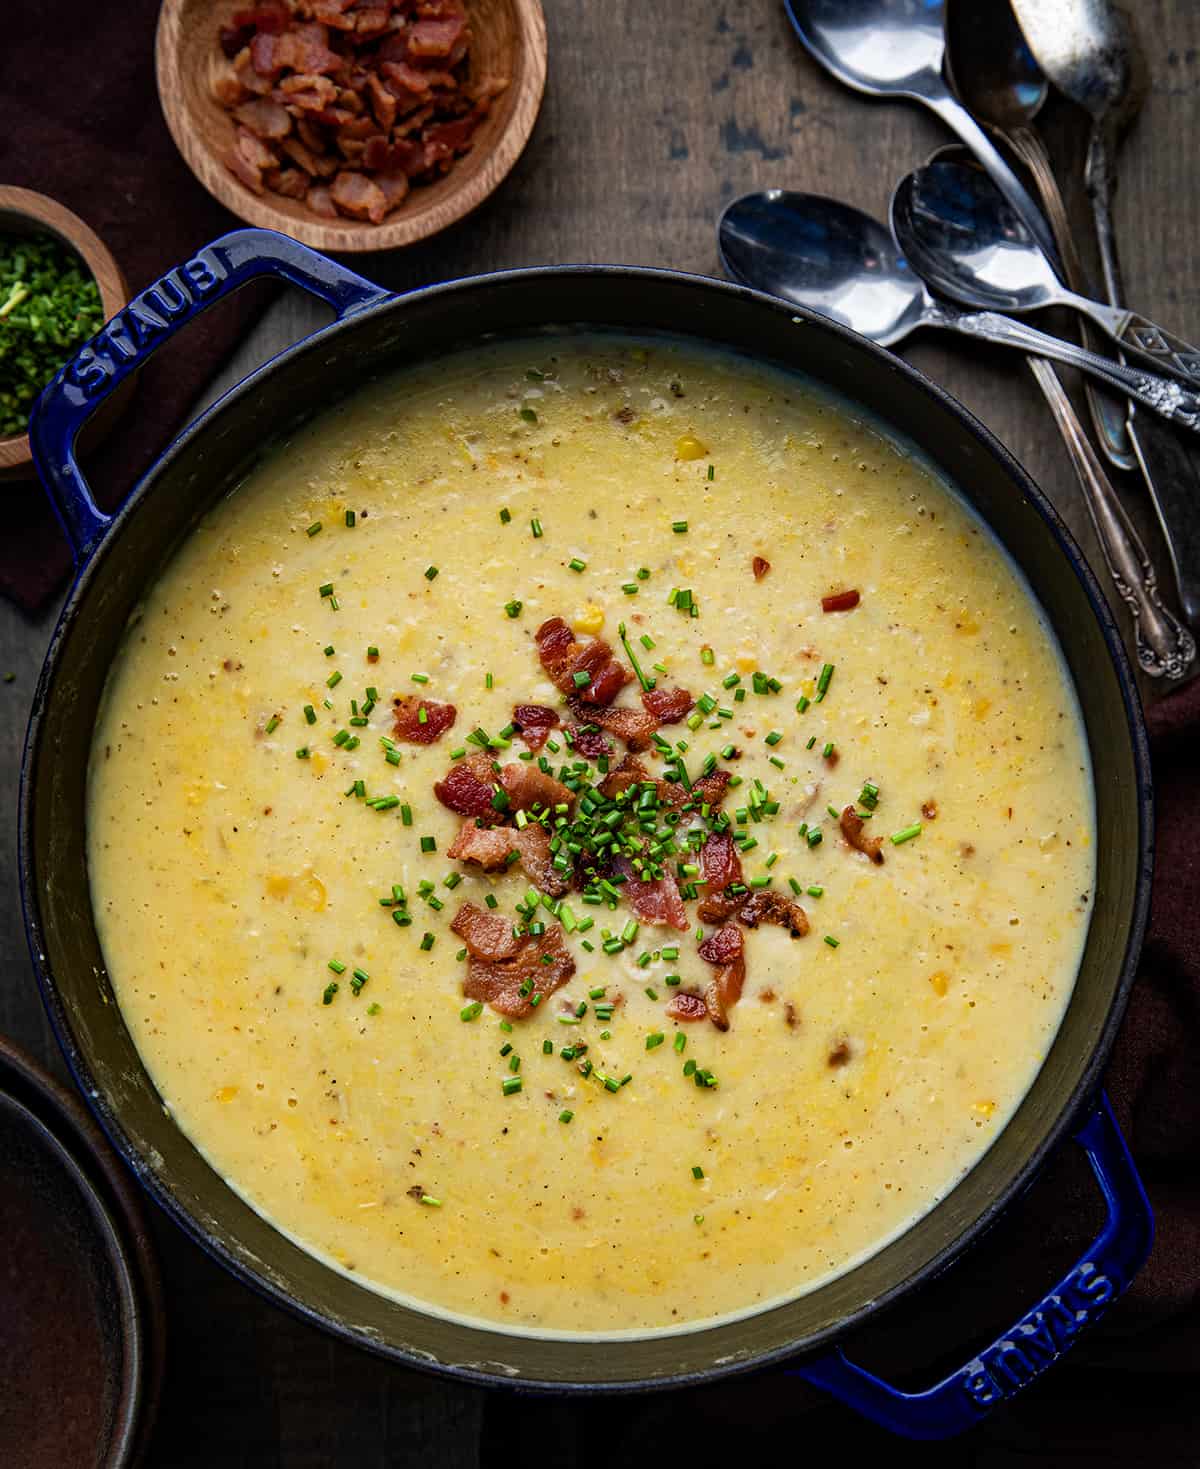 Overhead looking down on pot of Corn Chowder on a wooden table.